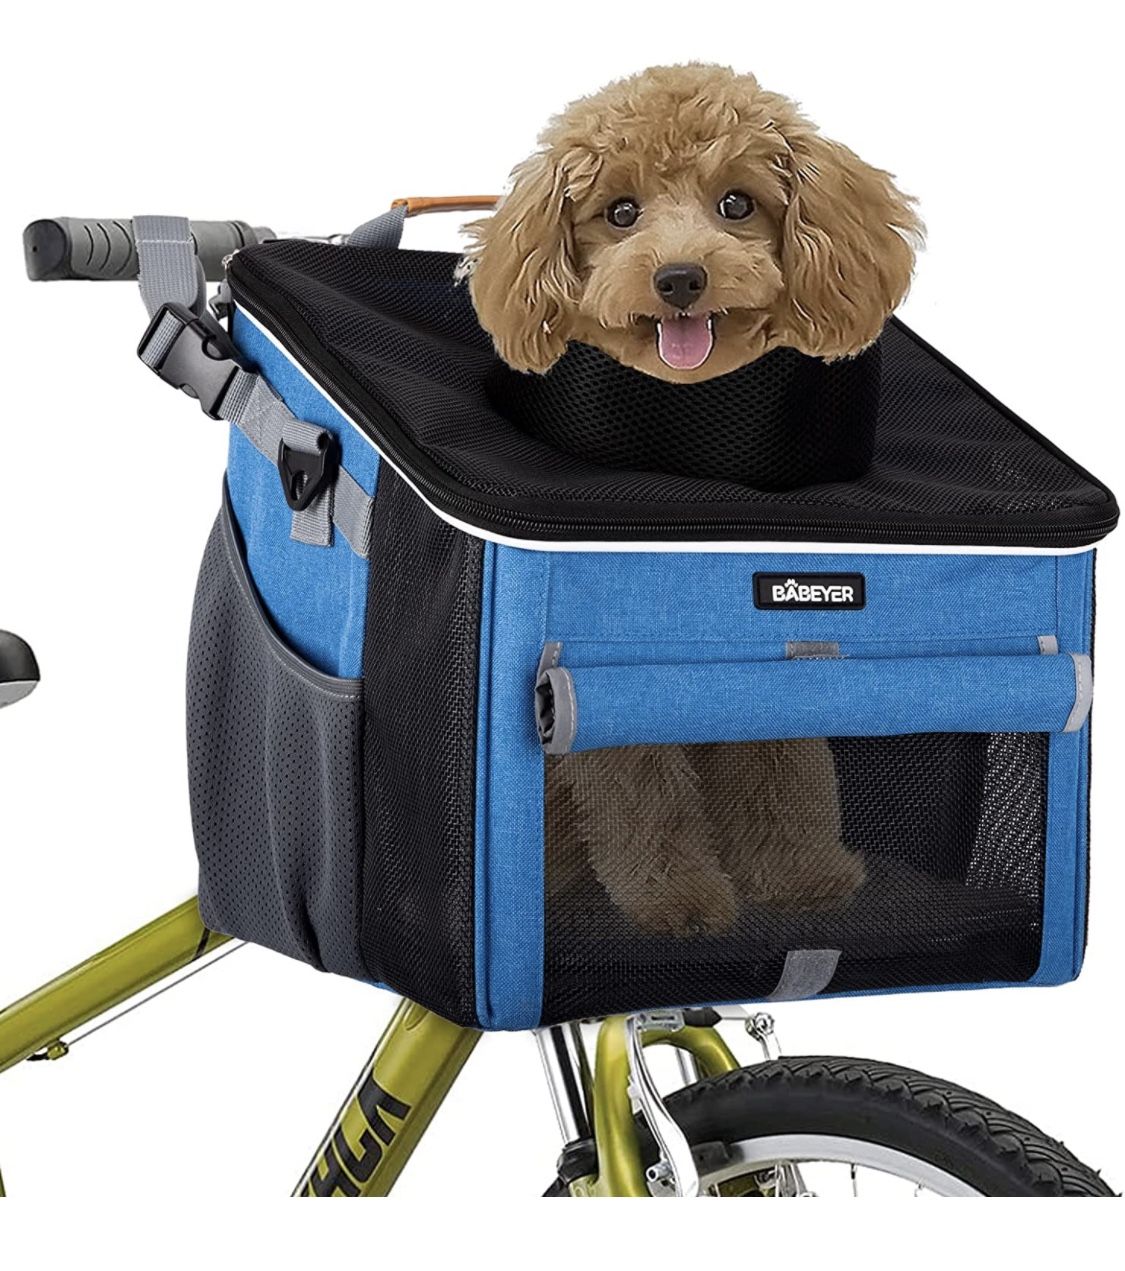 Bike Basket, Soft-Sided Dog Bike Carrier with 4 Mesh Windows for Small Dog Cat Puppies - Blue